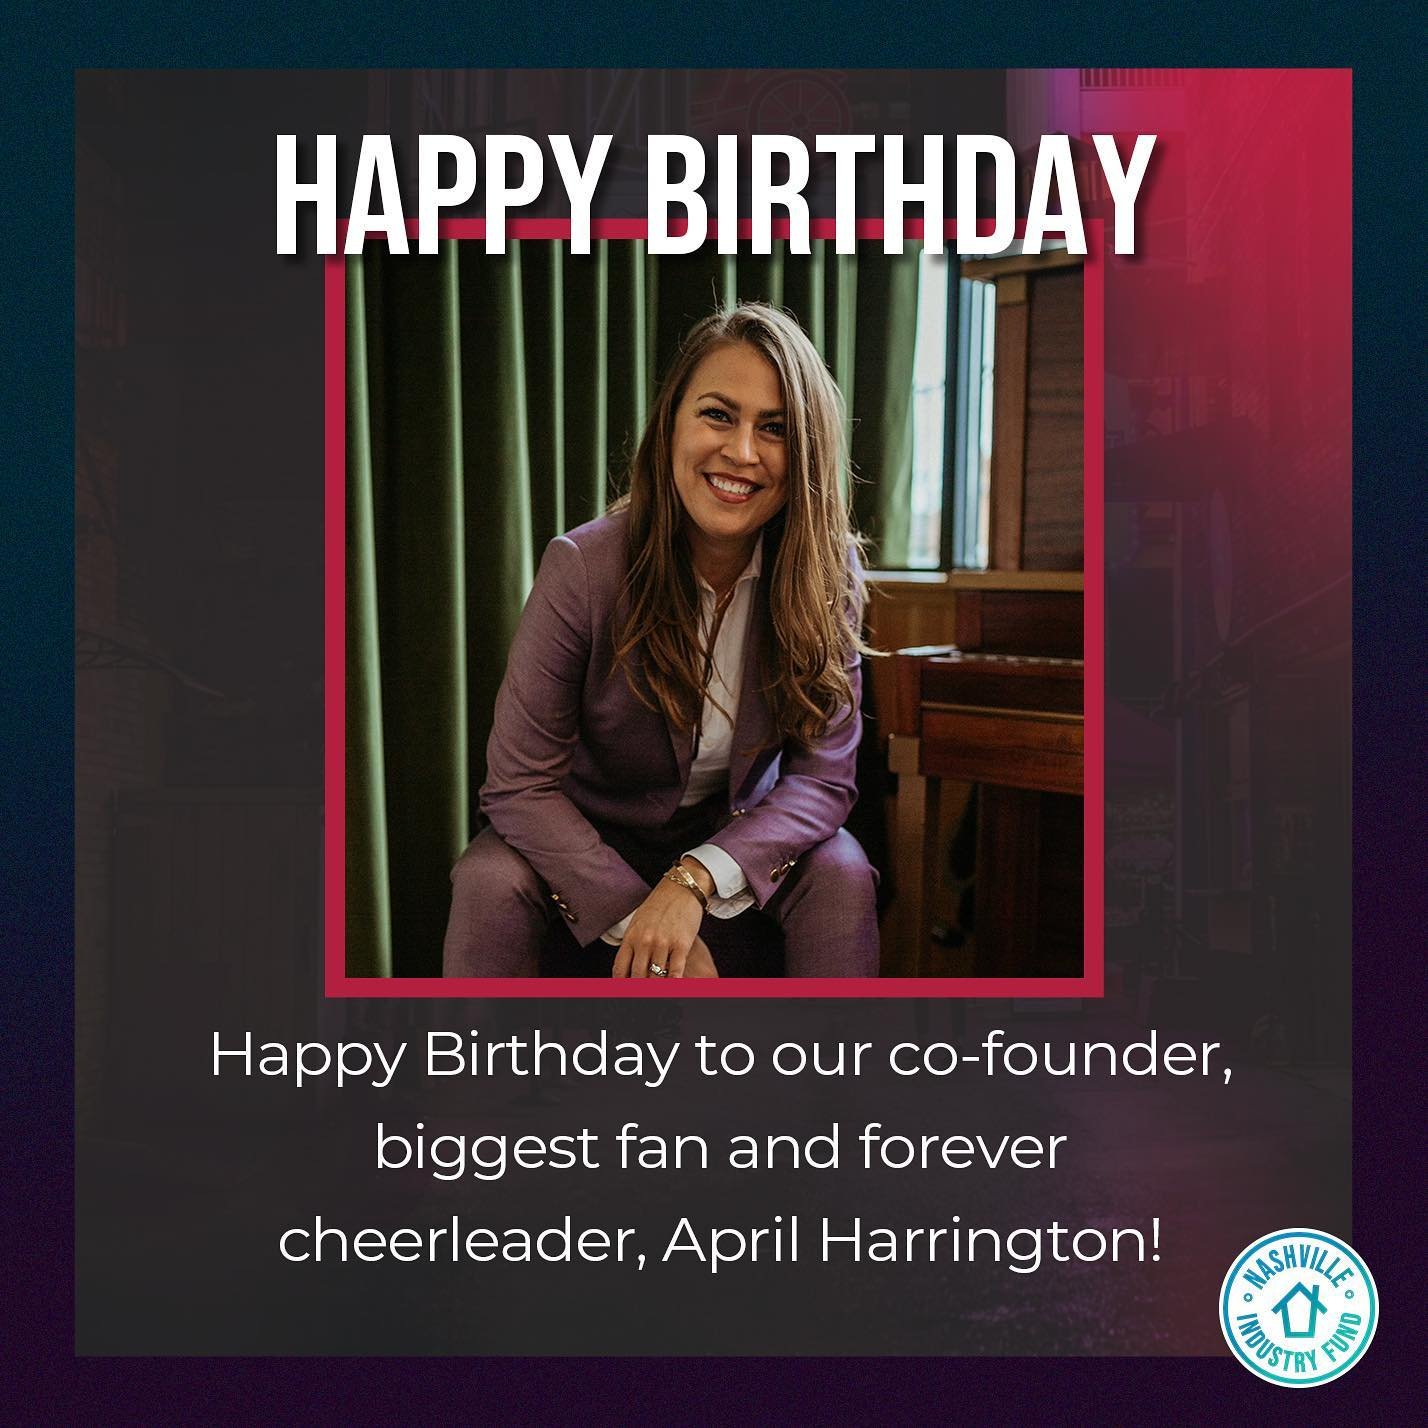 It might be May, but we&rsquo;re still celebrating APRIL!  As far as we&rsquo;re concerned, it&rsquo;s a national holiday. 

Happy Birthday to our co-founder, motivator, coach and cheerleader.  We love you and are so grateful for you!!

Cheers to you